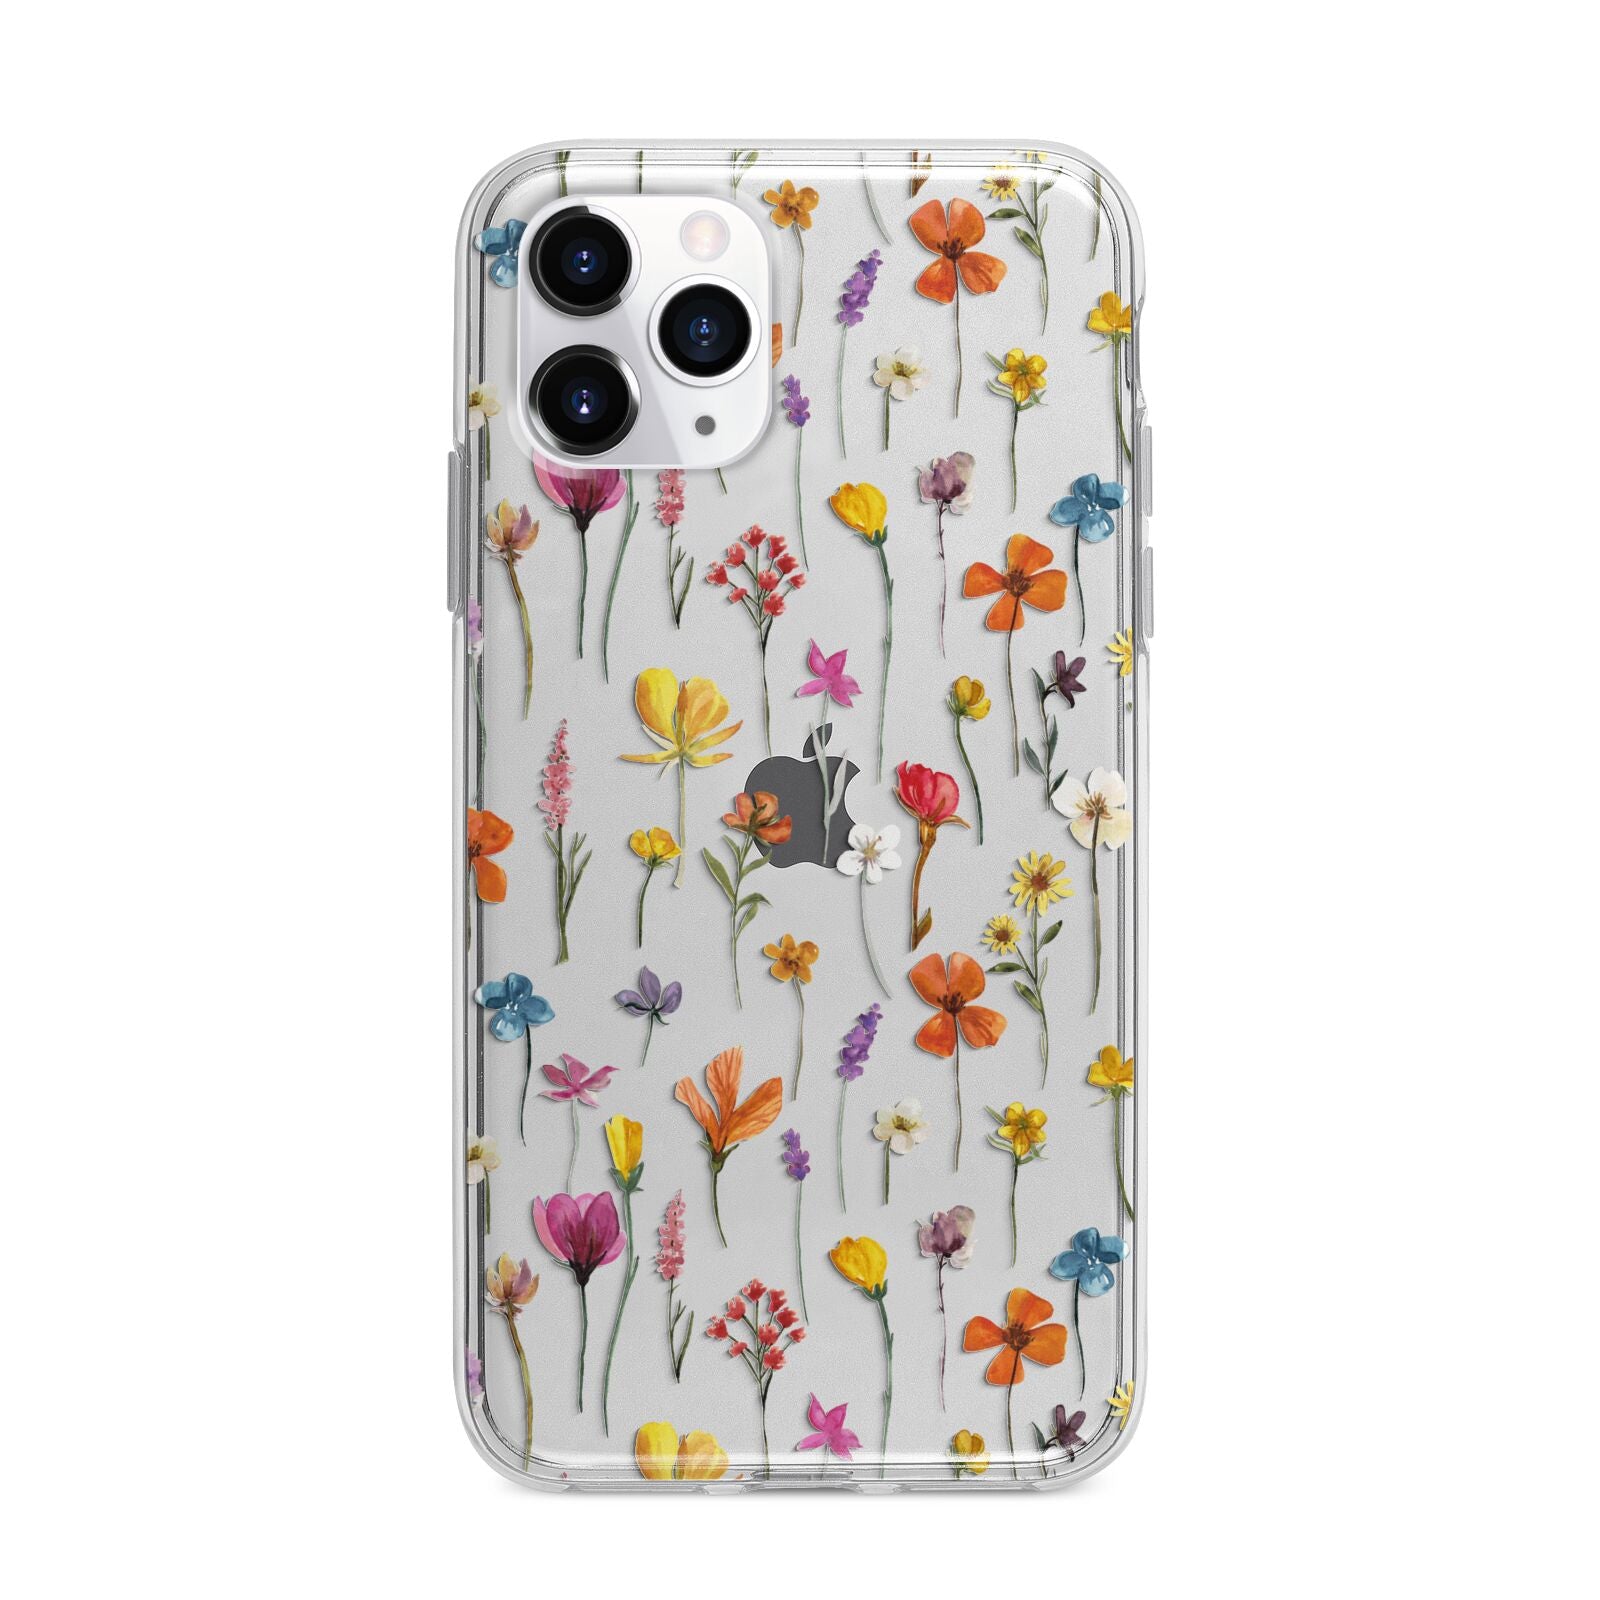 Botanical Floral Apple iPhone 11 Pro in Silver with Bumper Case